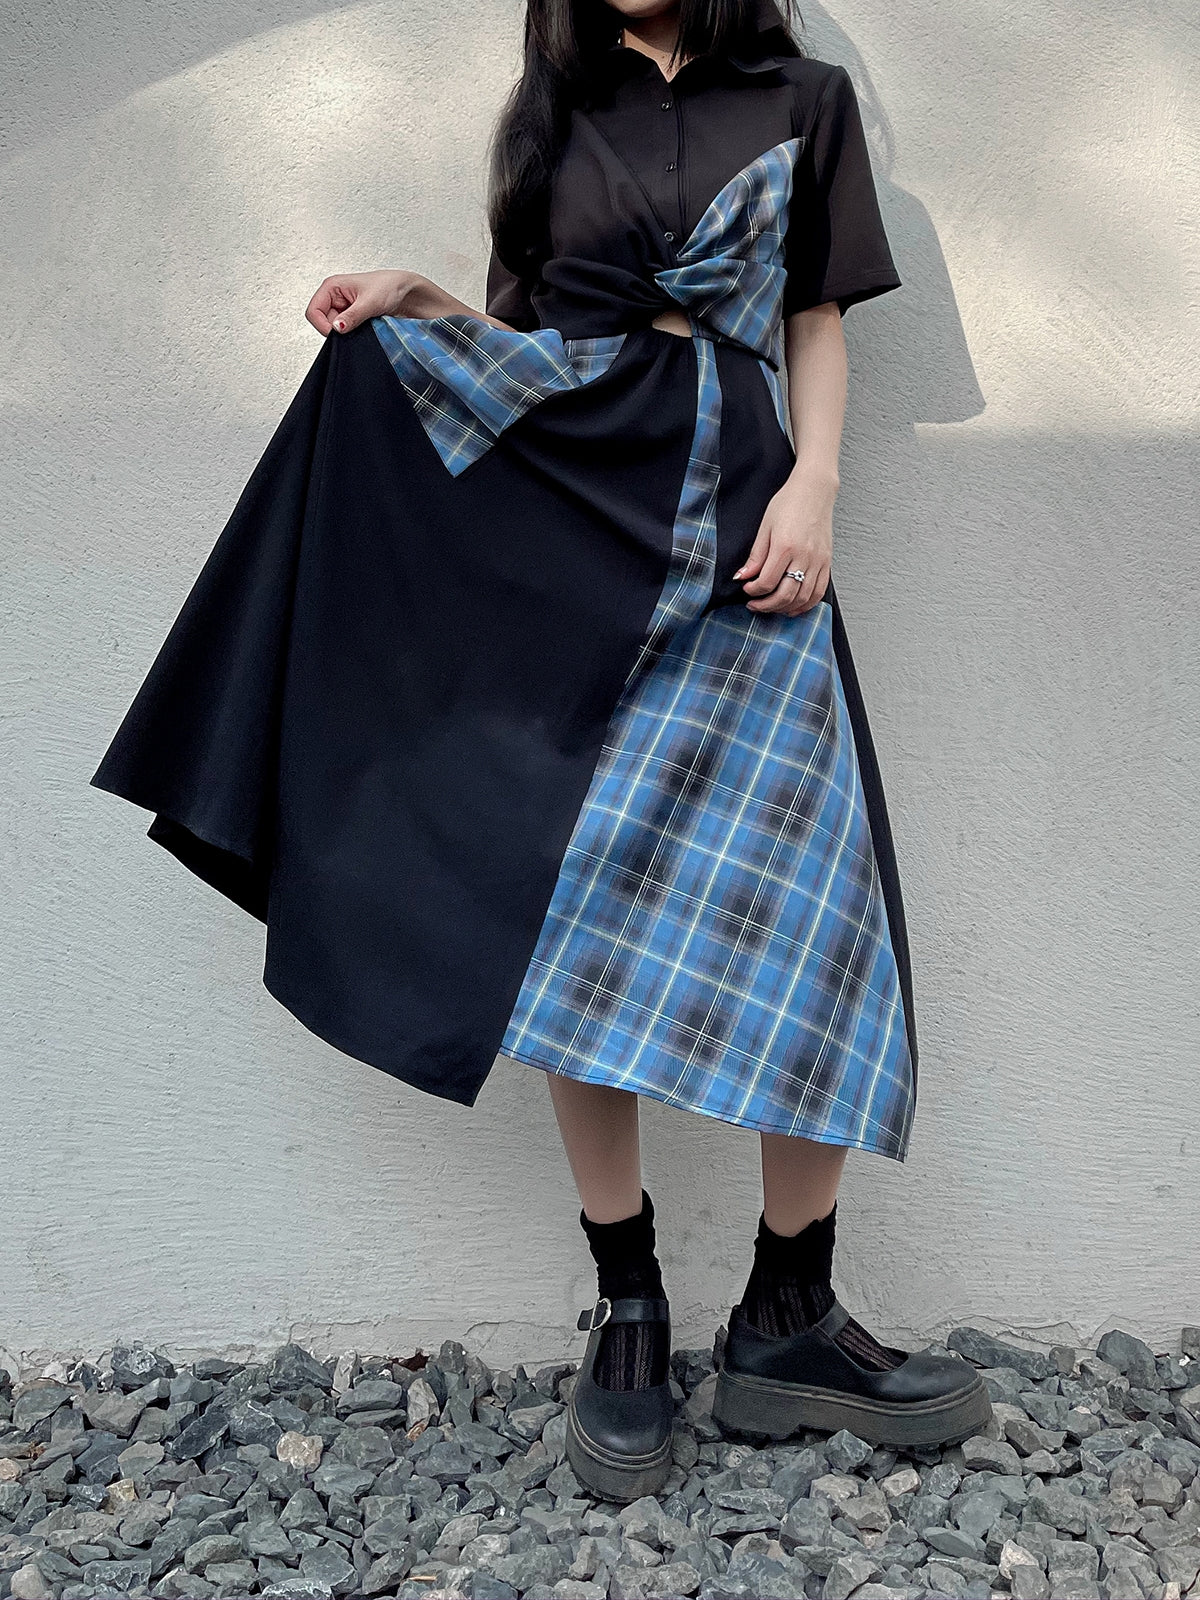 [Reservation sale] Patchwork style dress of Alice who ate Appelkuchen